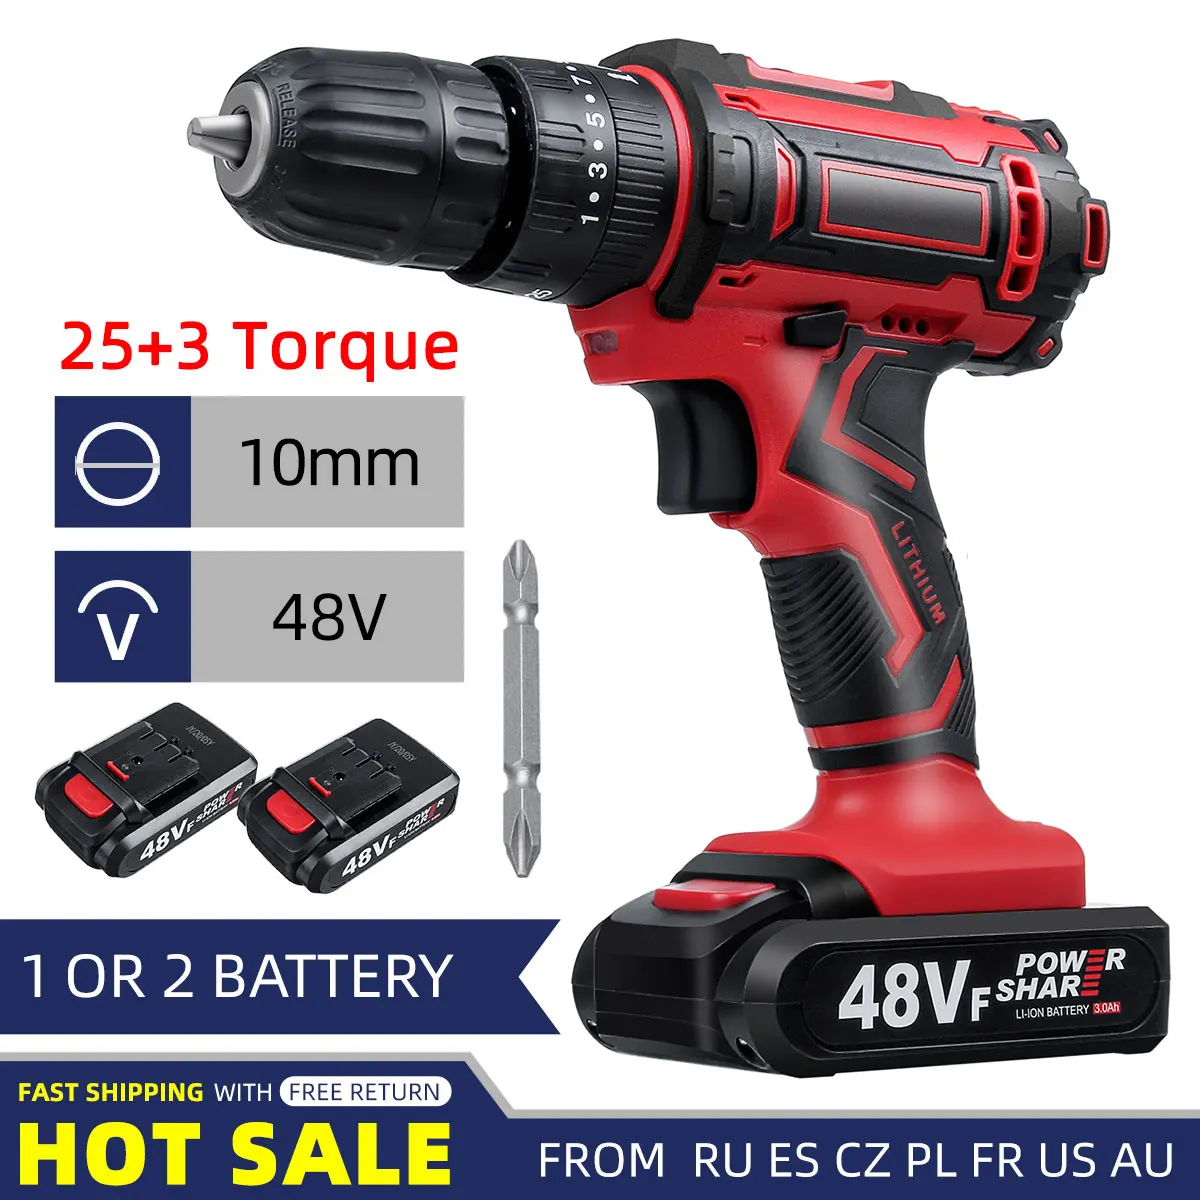 

48V 10mm 25+3 Torque Electric Impact Drill Cordless Screwdriver Electric Hammer Impact Drilling Power Tool with 2 Batteries